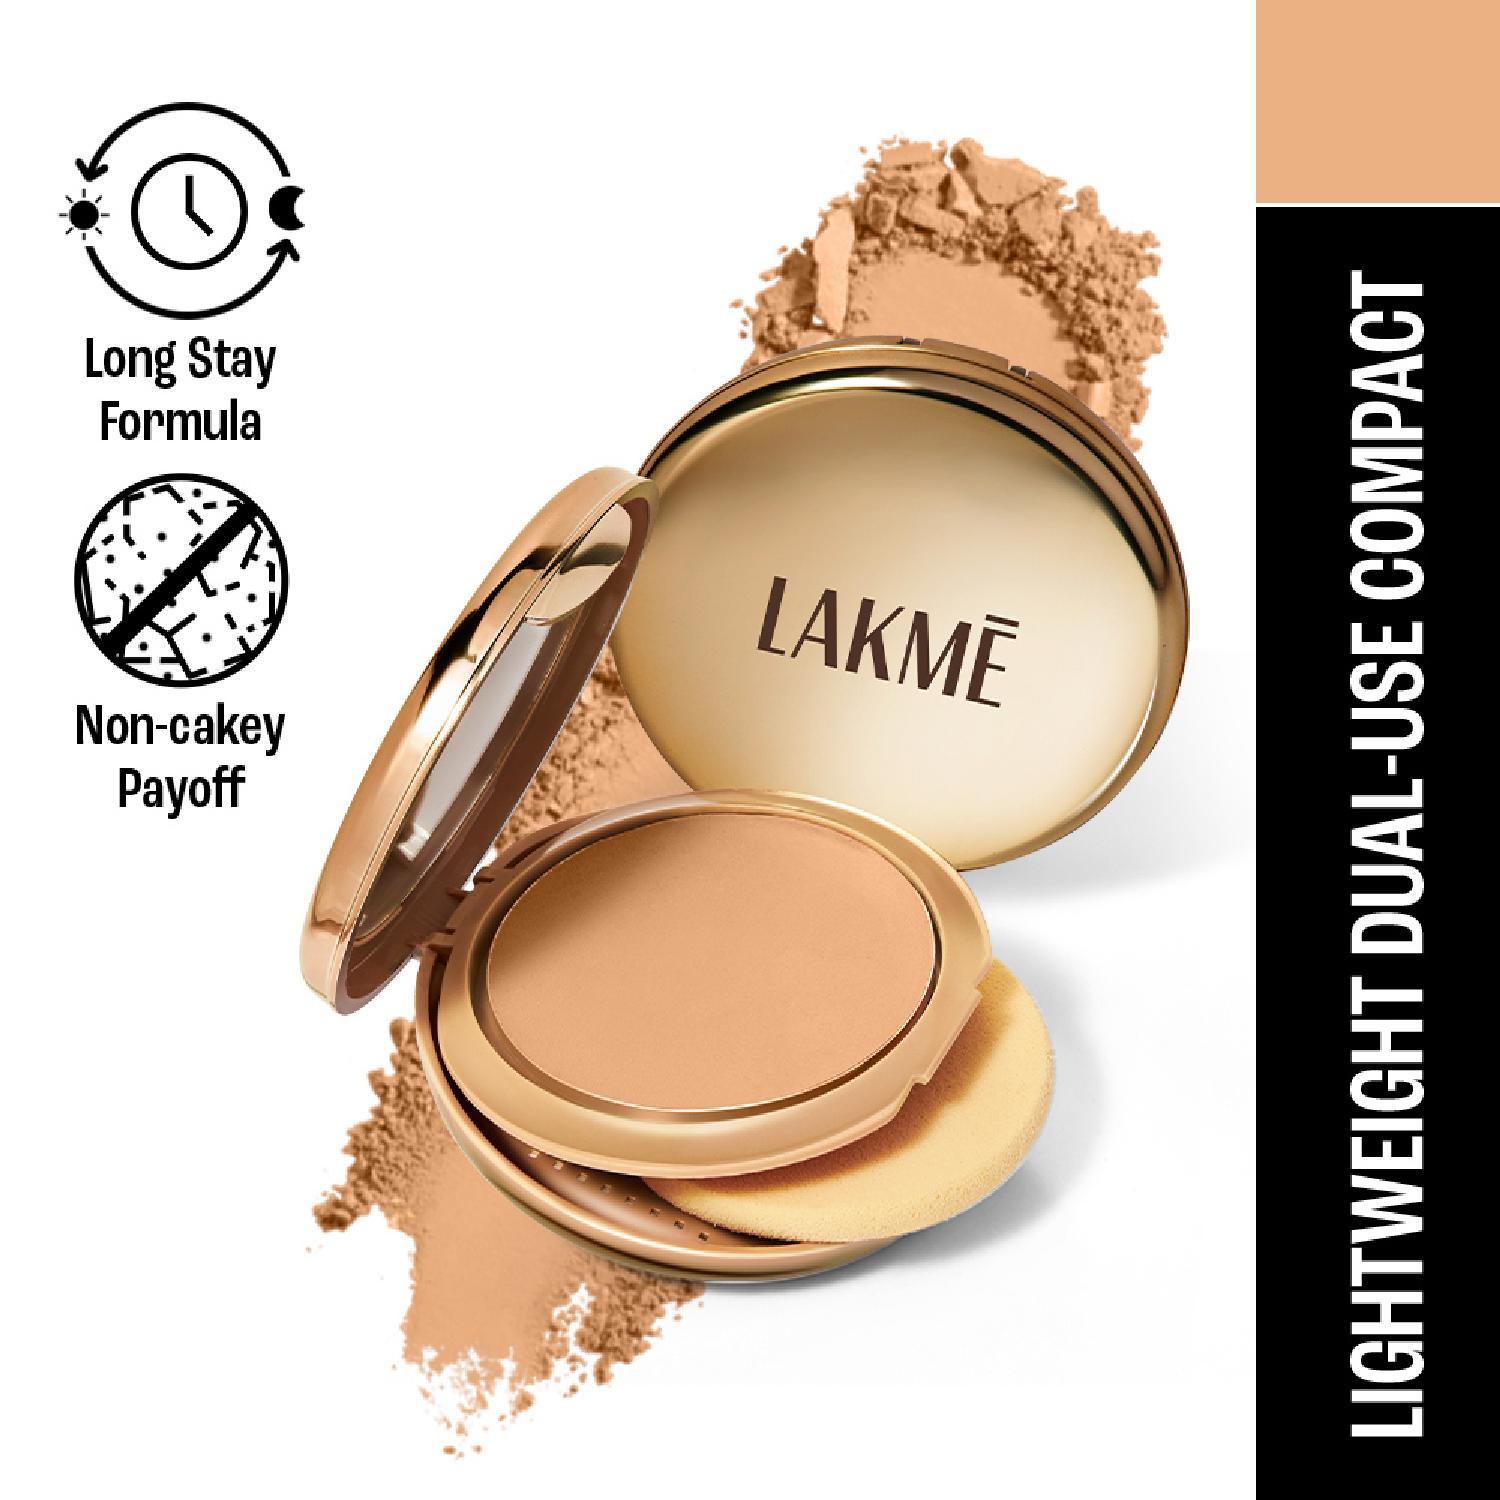 Lakme | Lakme 9 to 5 Unreal Dual Cover Pressed Powder, 2 In 1 Compact + Foundation, 24 Beige (9g)